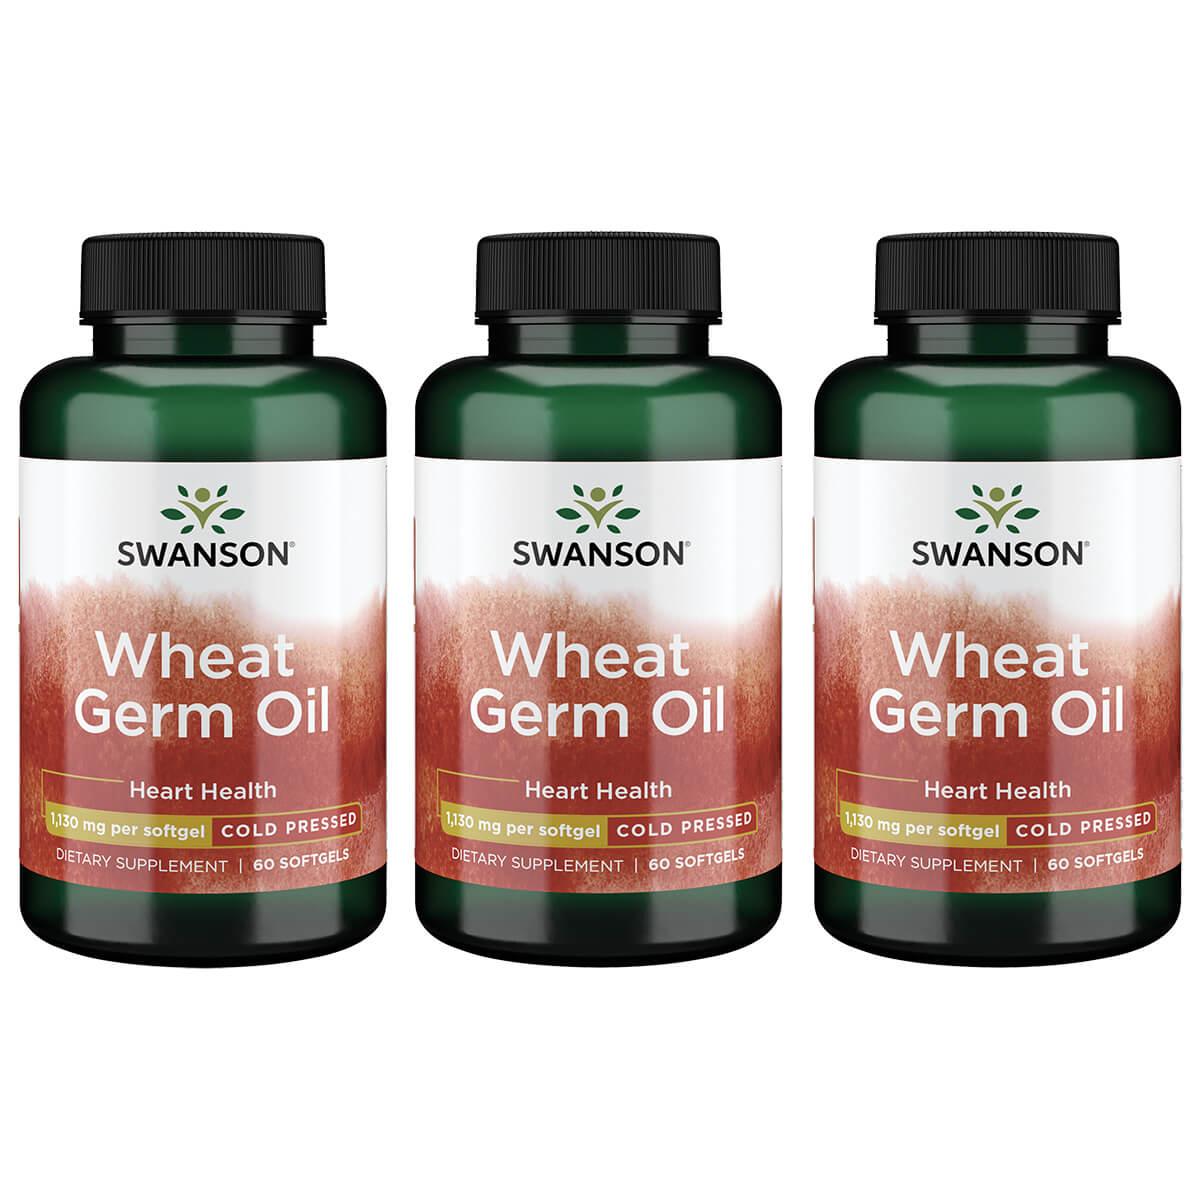 Swanson EFAs Wheat Germ Oil - Cold Pressed 3 Pack Supplement Vitamin 1130 mg 60 Soft Gels